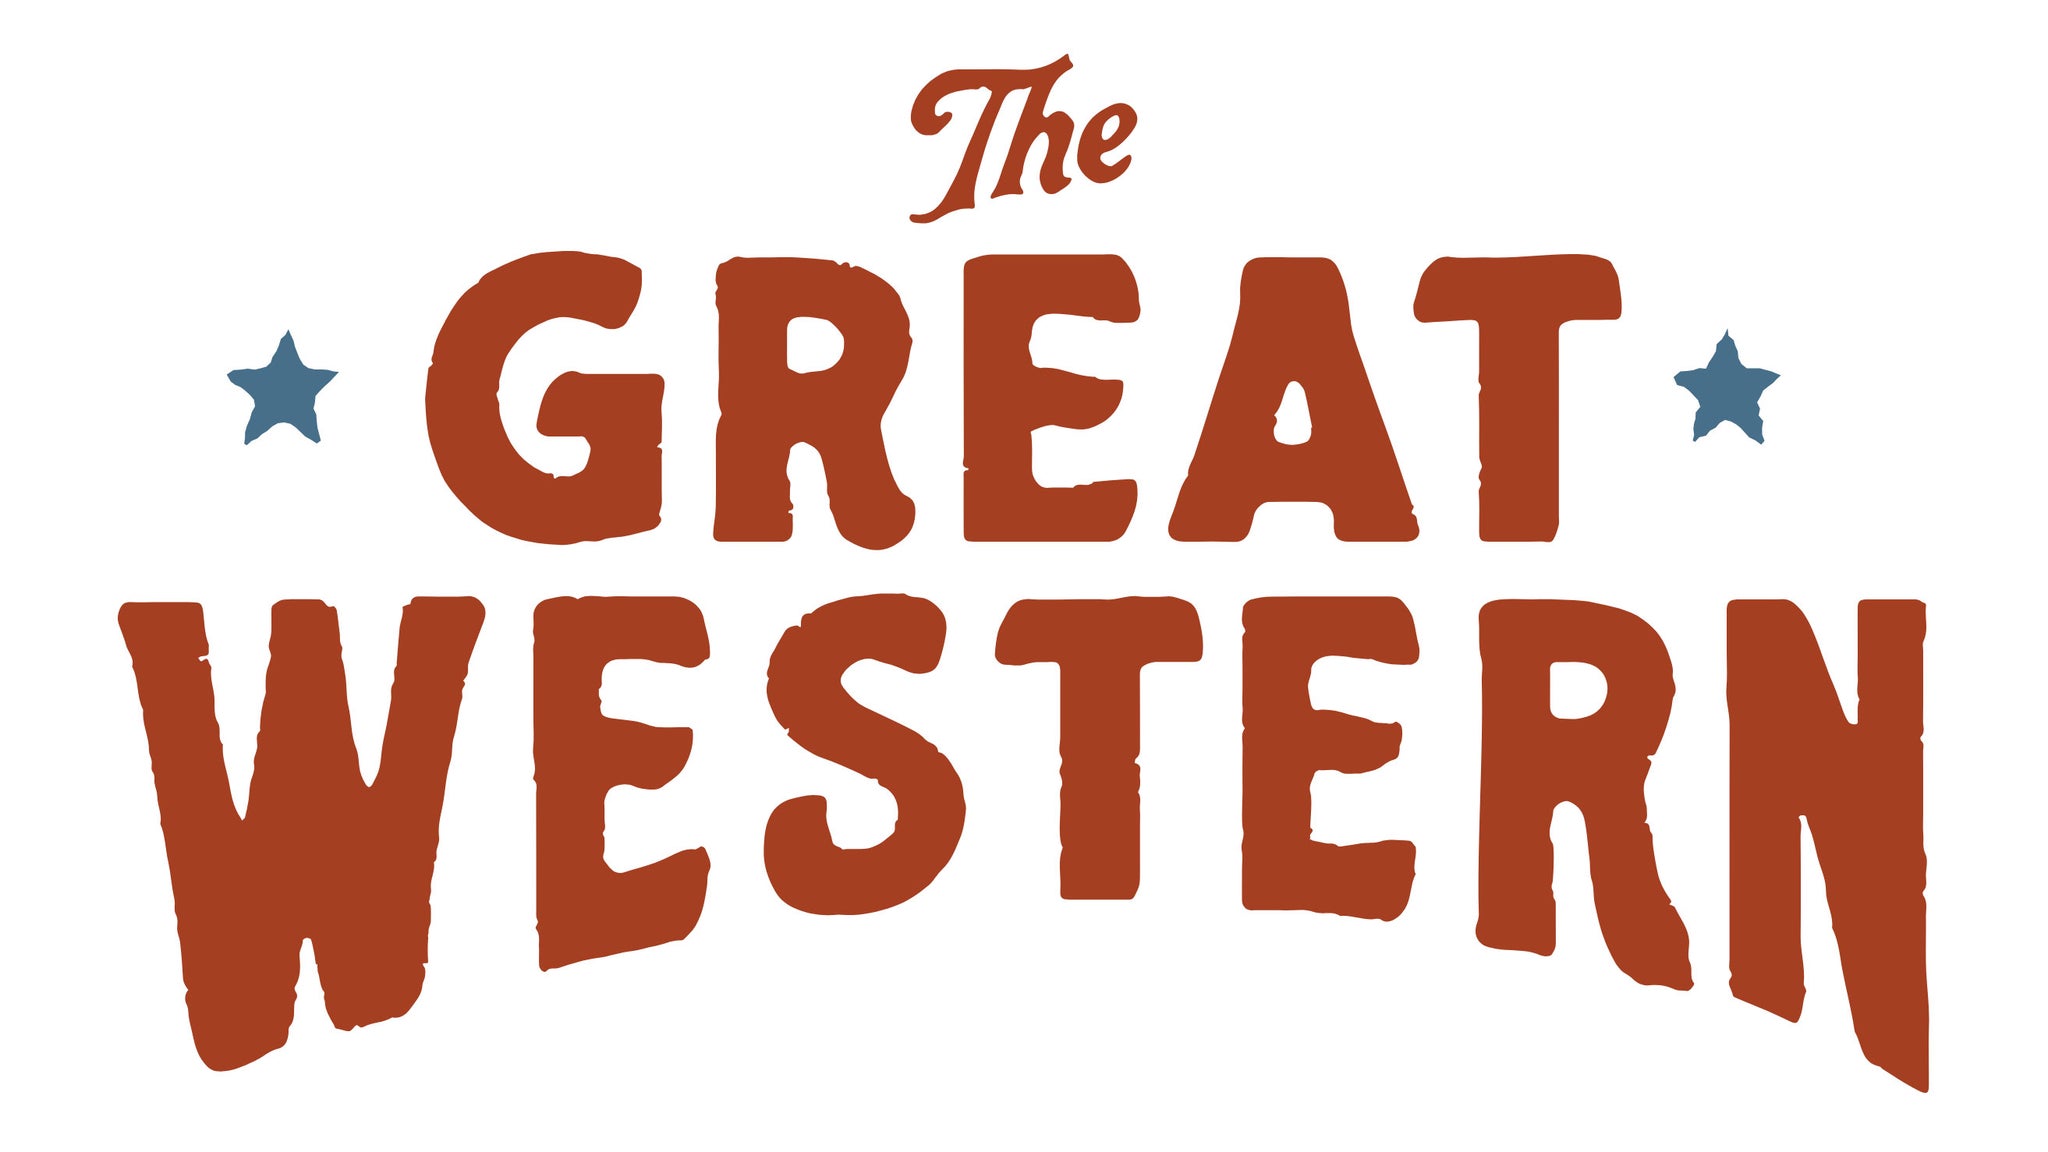 The Great Western Festival